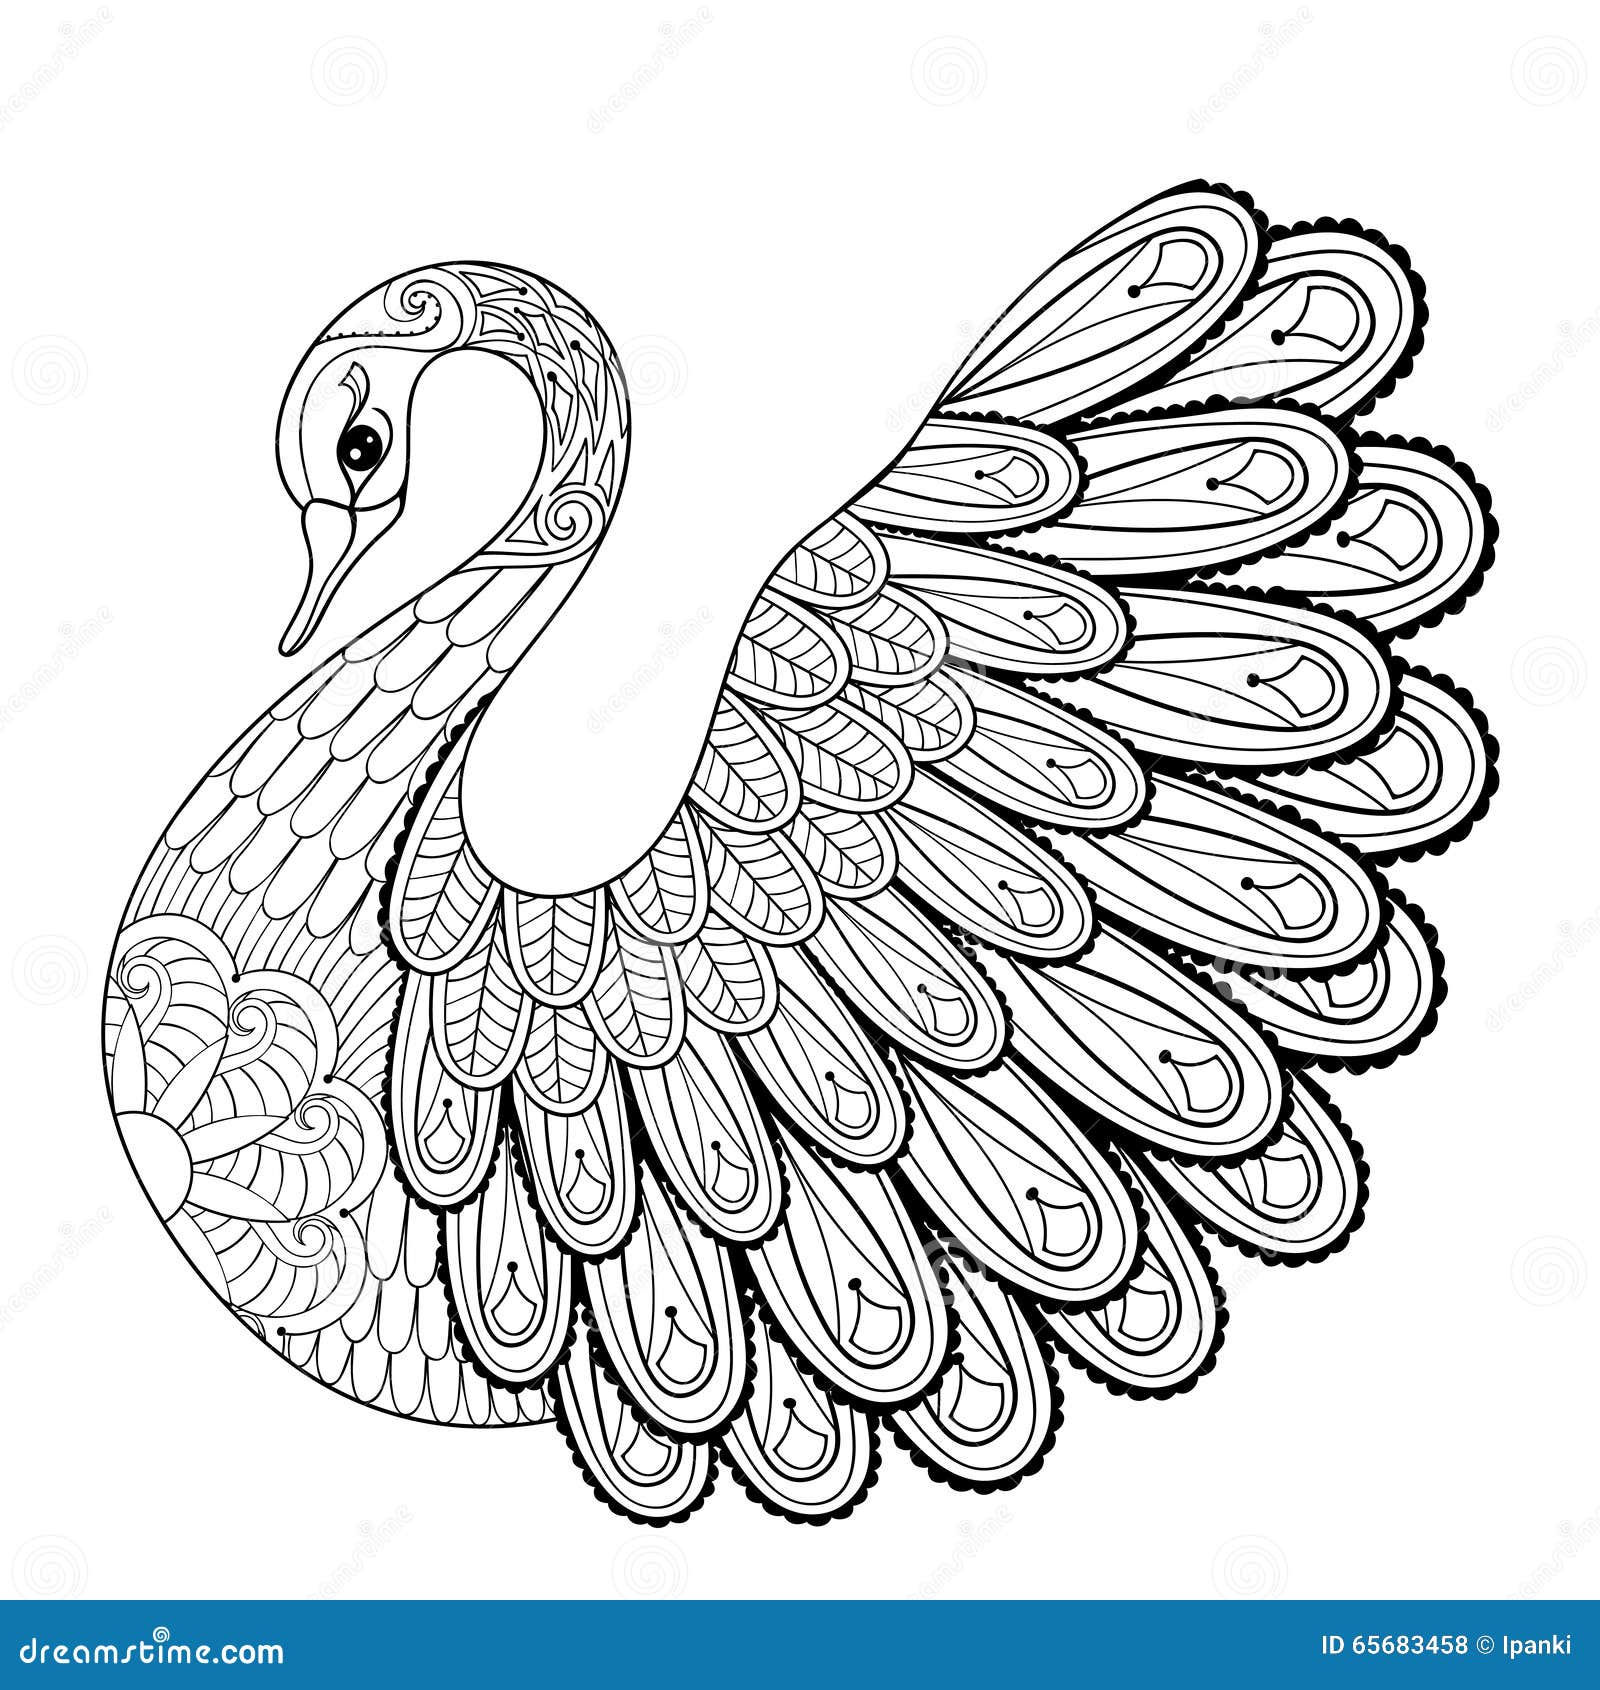 Hand Drawing Artistic Swan for Adult Coloring Pages in Doodle ...